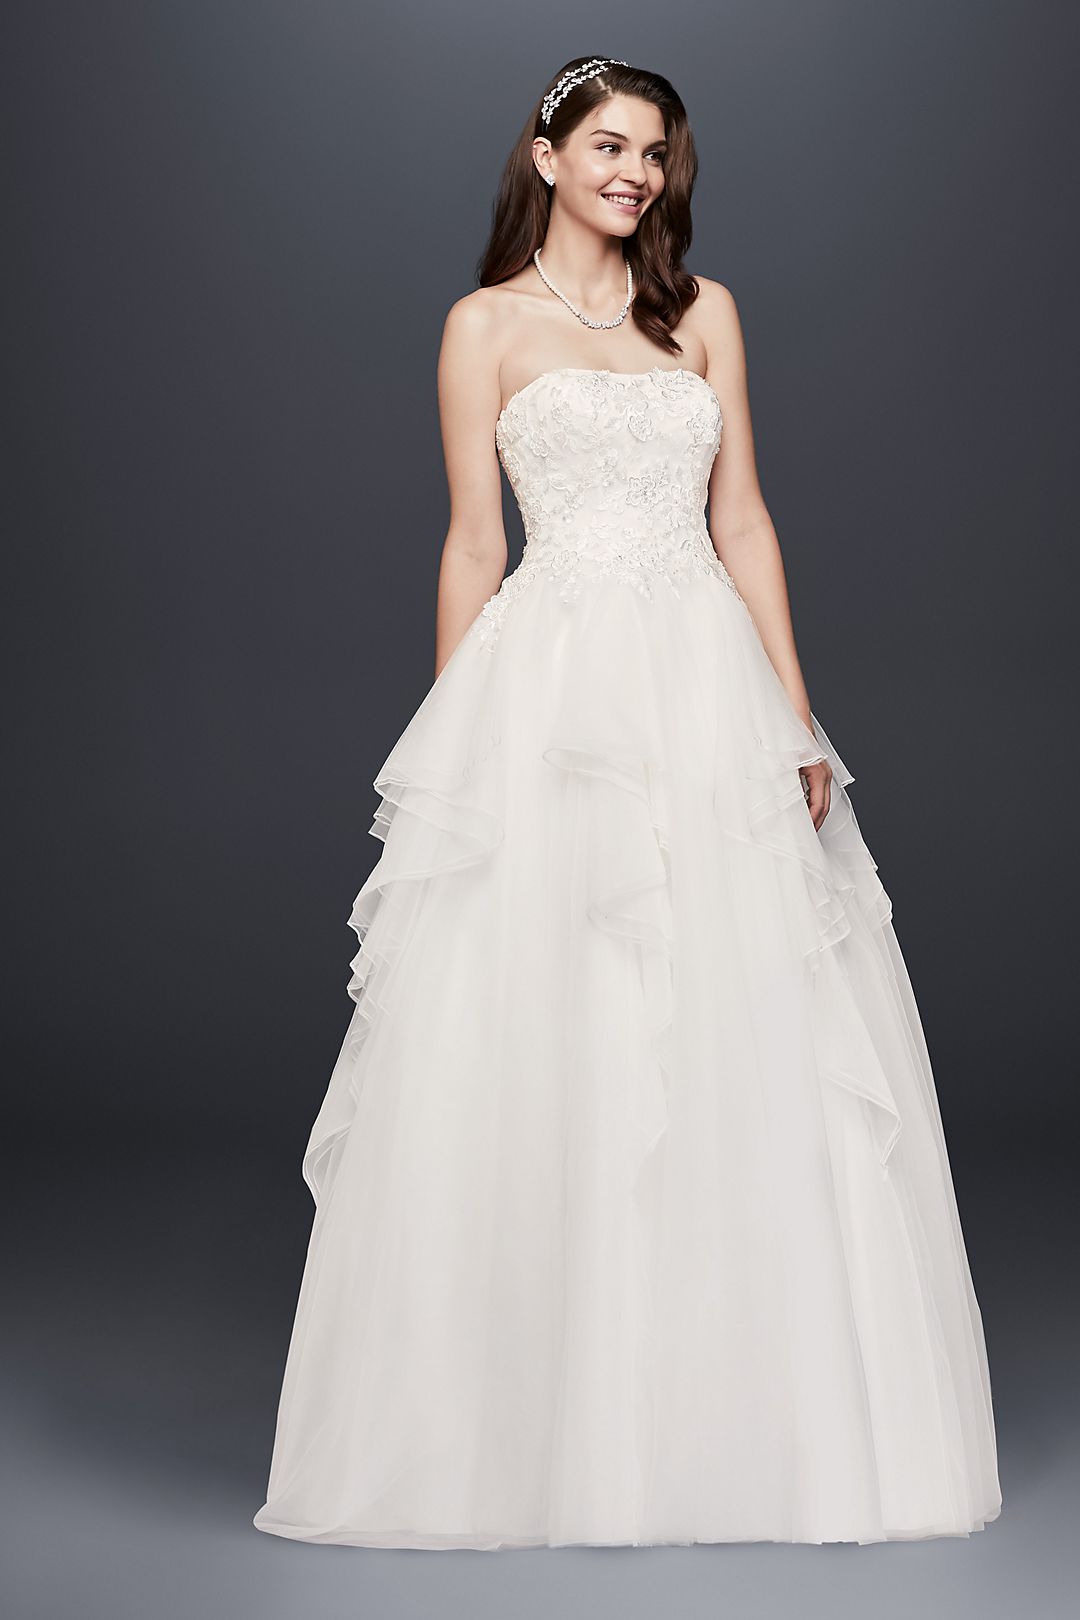 Tulle Wedding Dress with 3D Floral Appliques Image 4